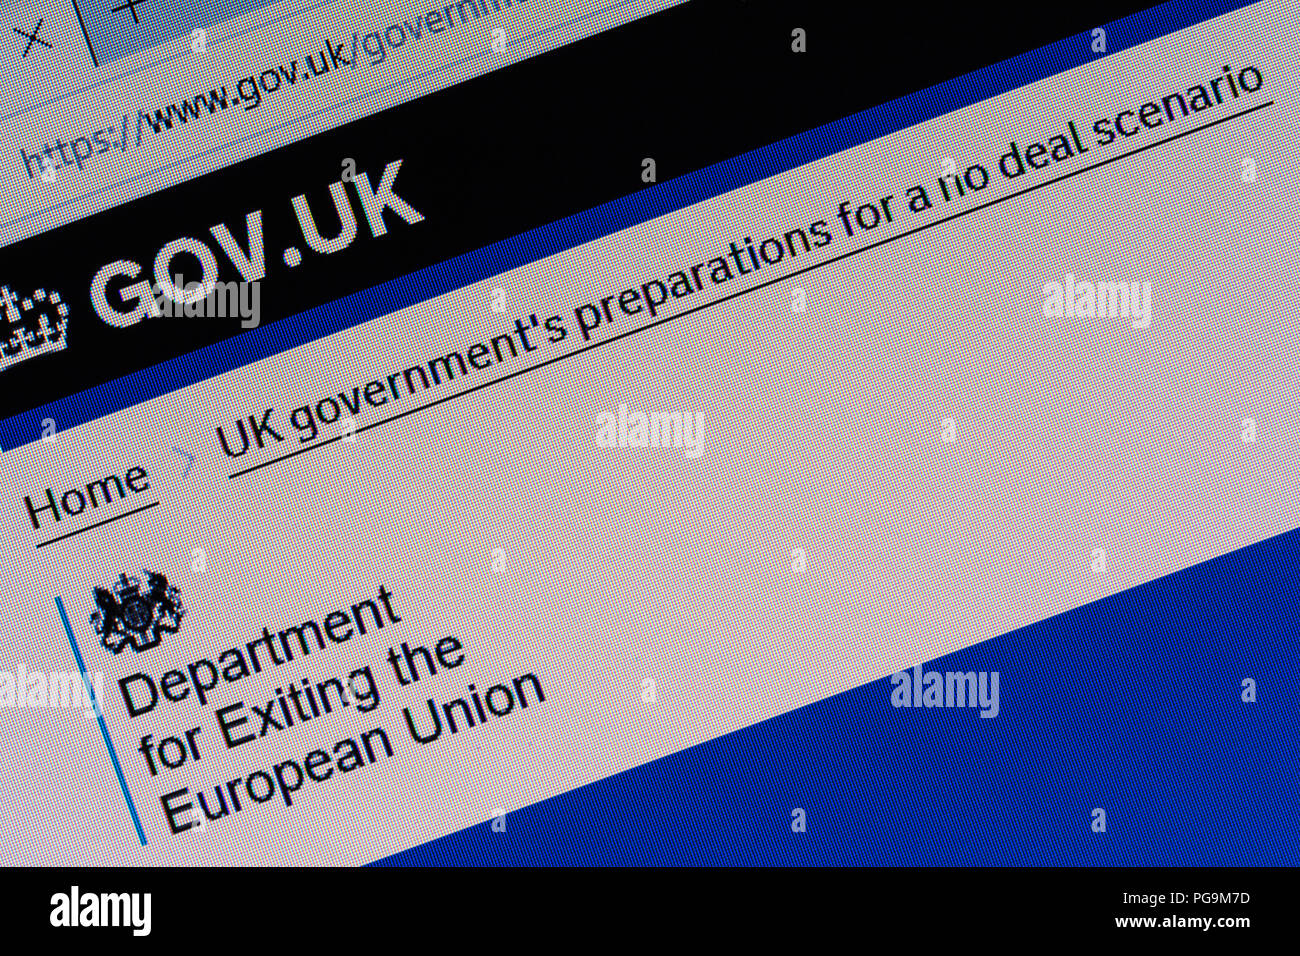 Gov.uk website screenshot displaying information about the UK government's preparations for a no deal Brexit scenario, August 2018 Stock Photo